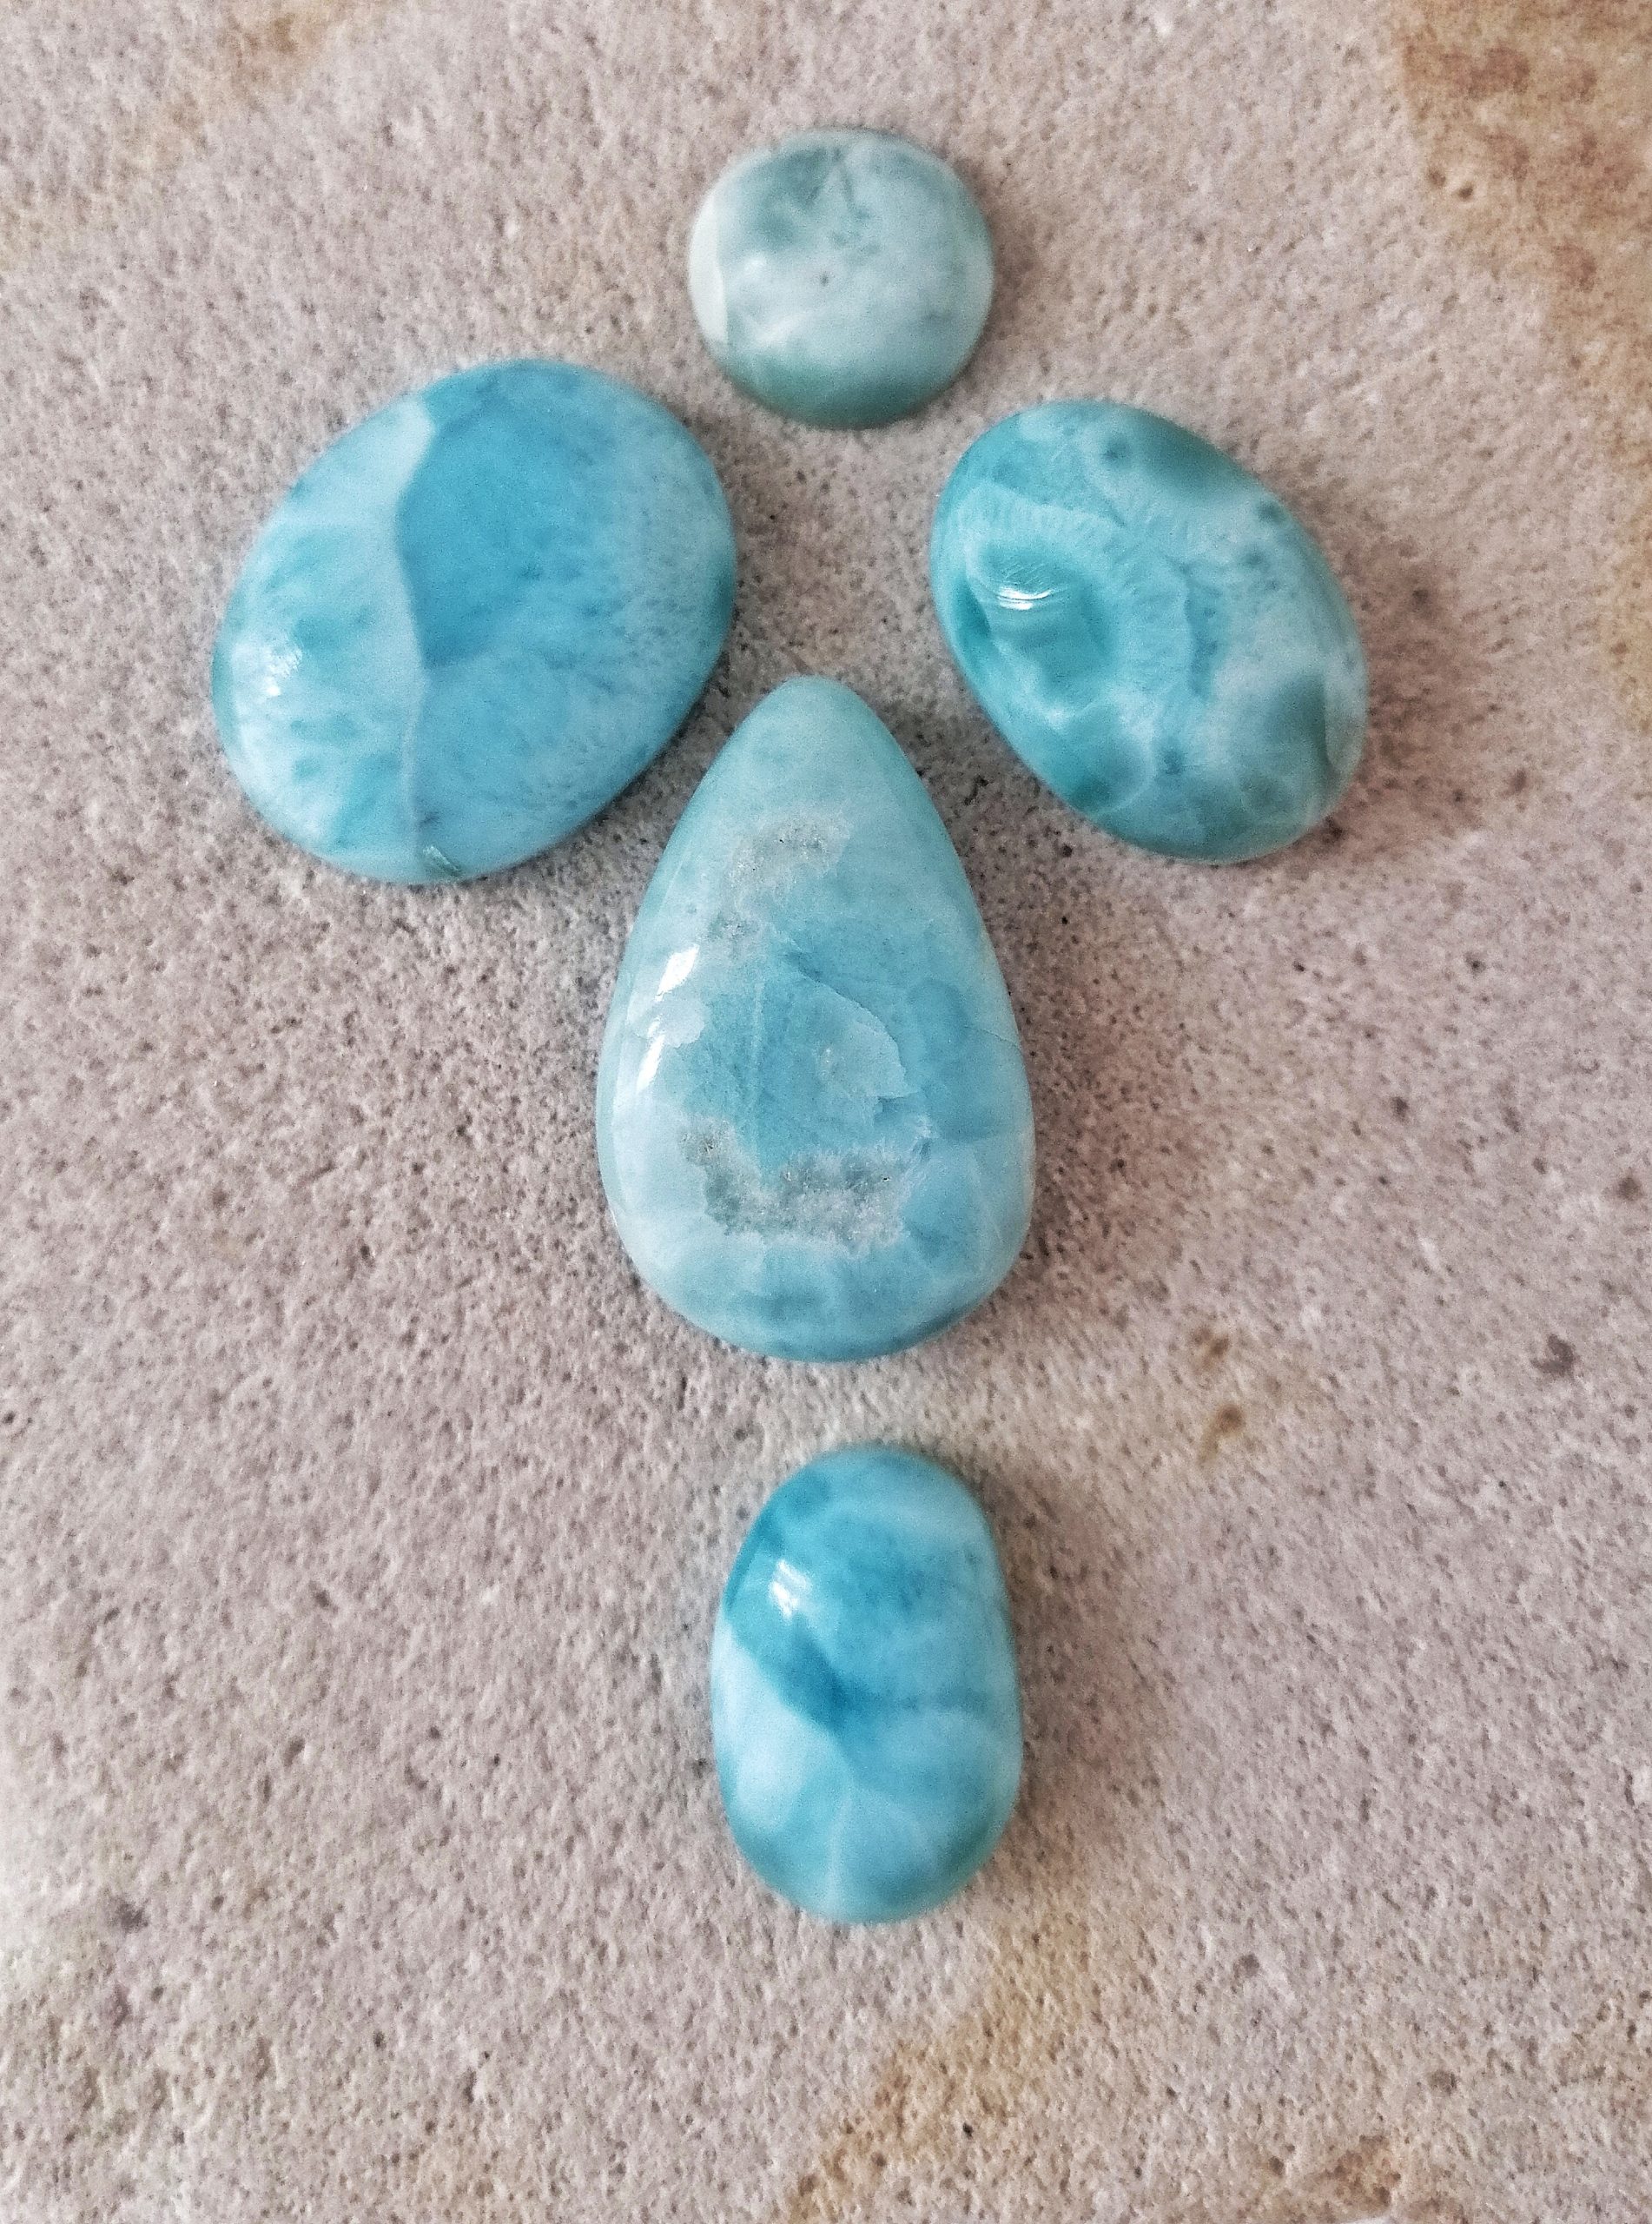 Larimar gemstones are found exclusively in the Dominican Republic. A clear blue sea color gemstone that was discovered in 1974.